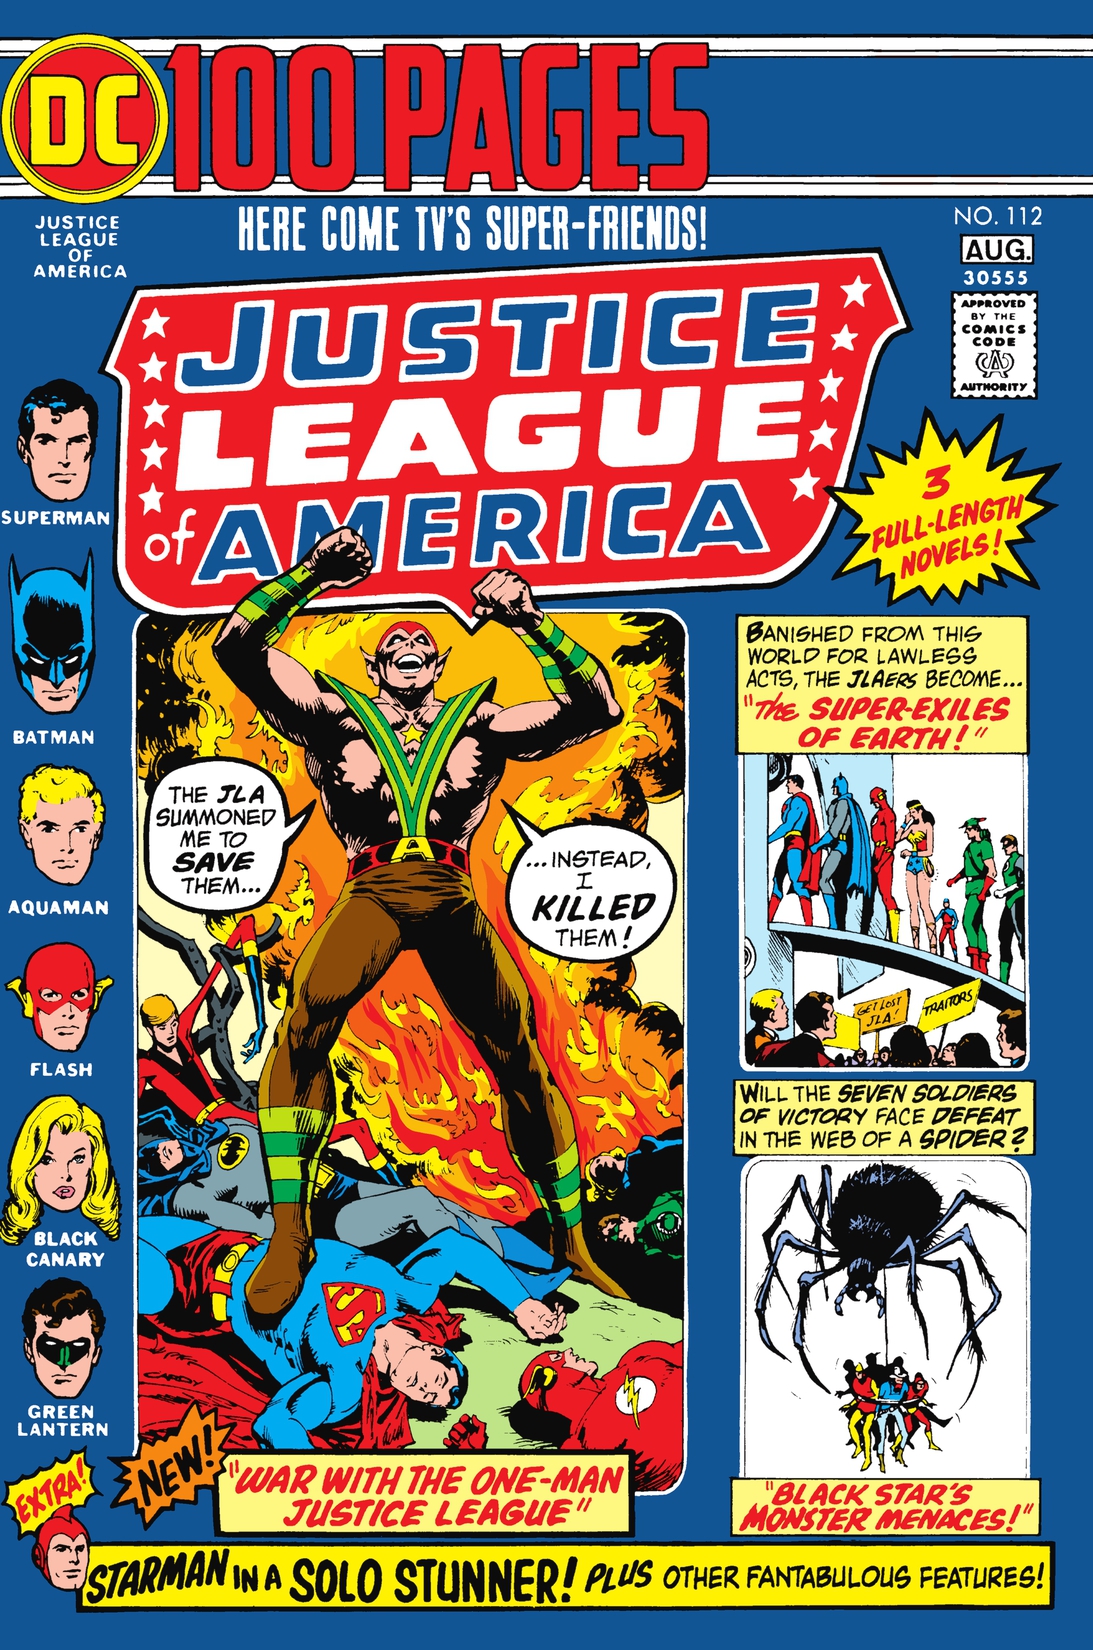 Justice League of America (1960-1987) #112 preview images